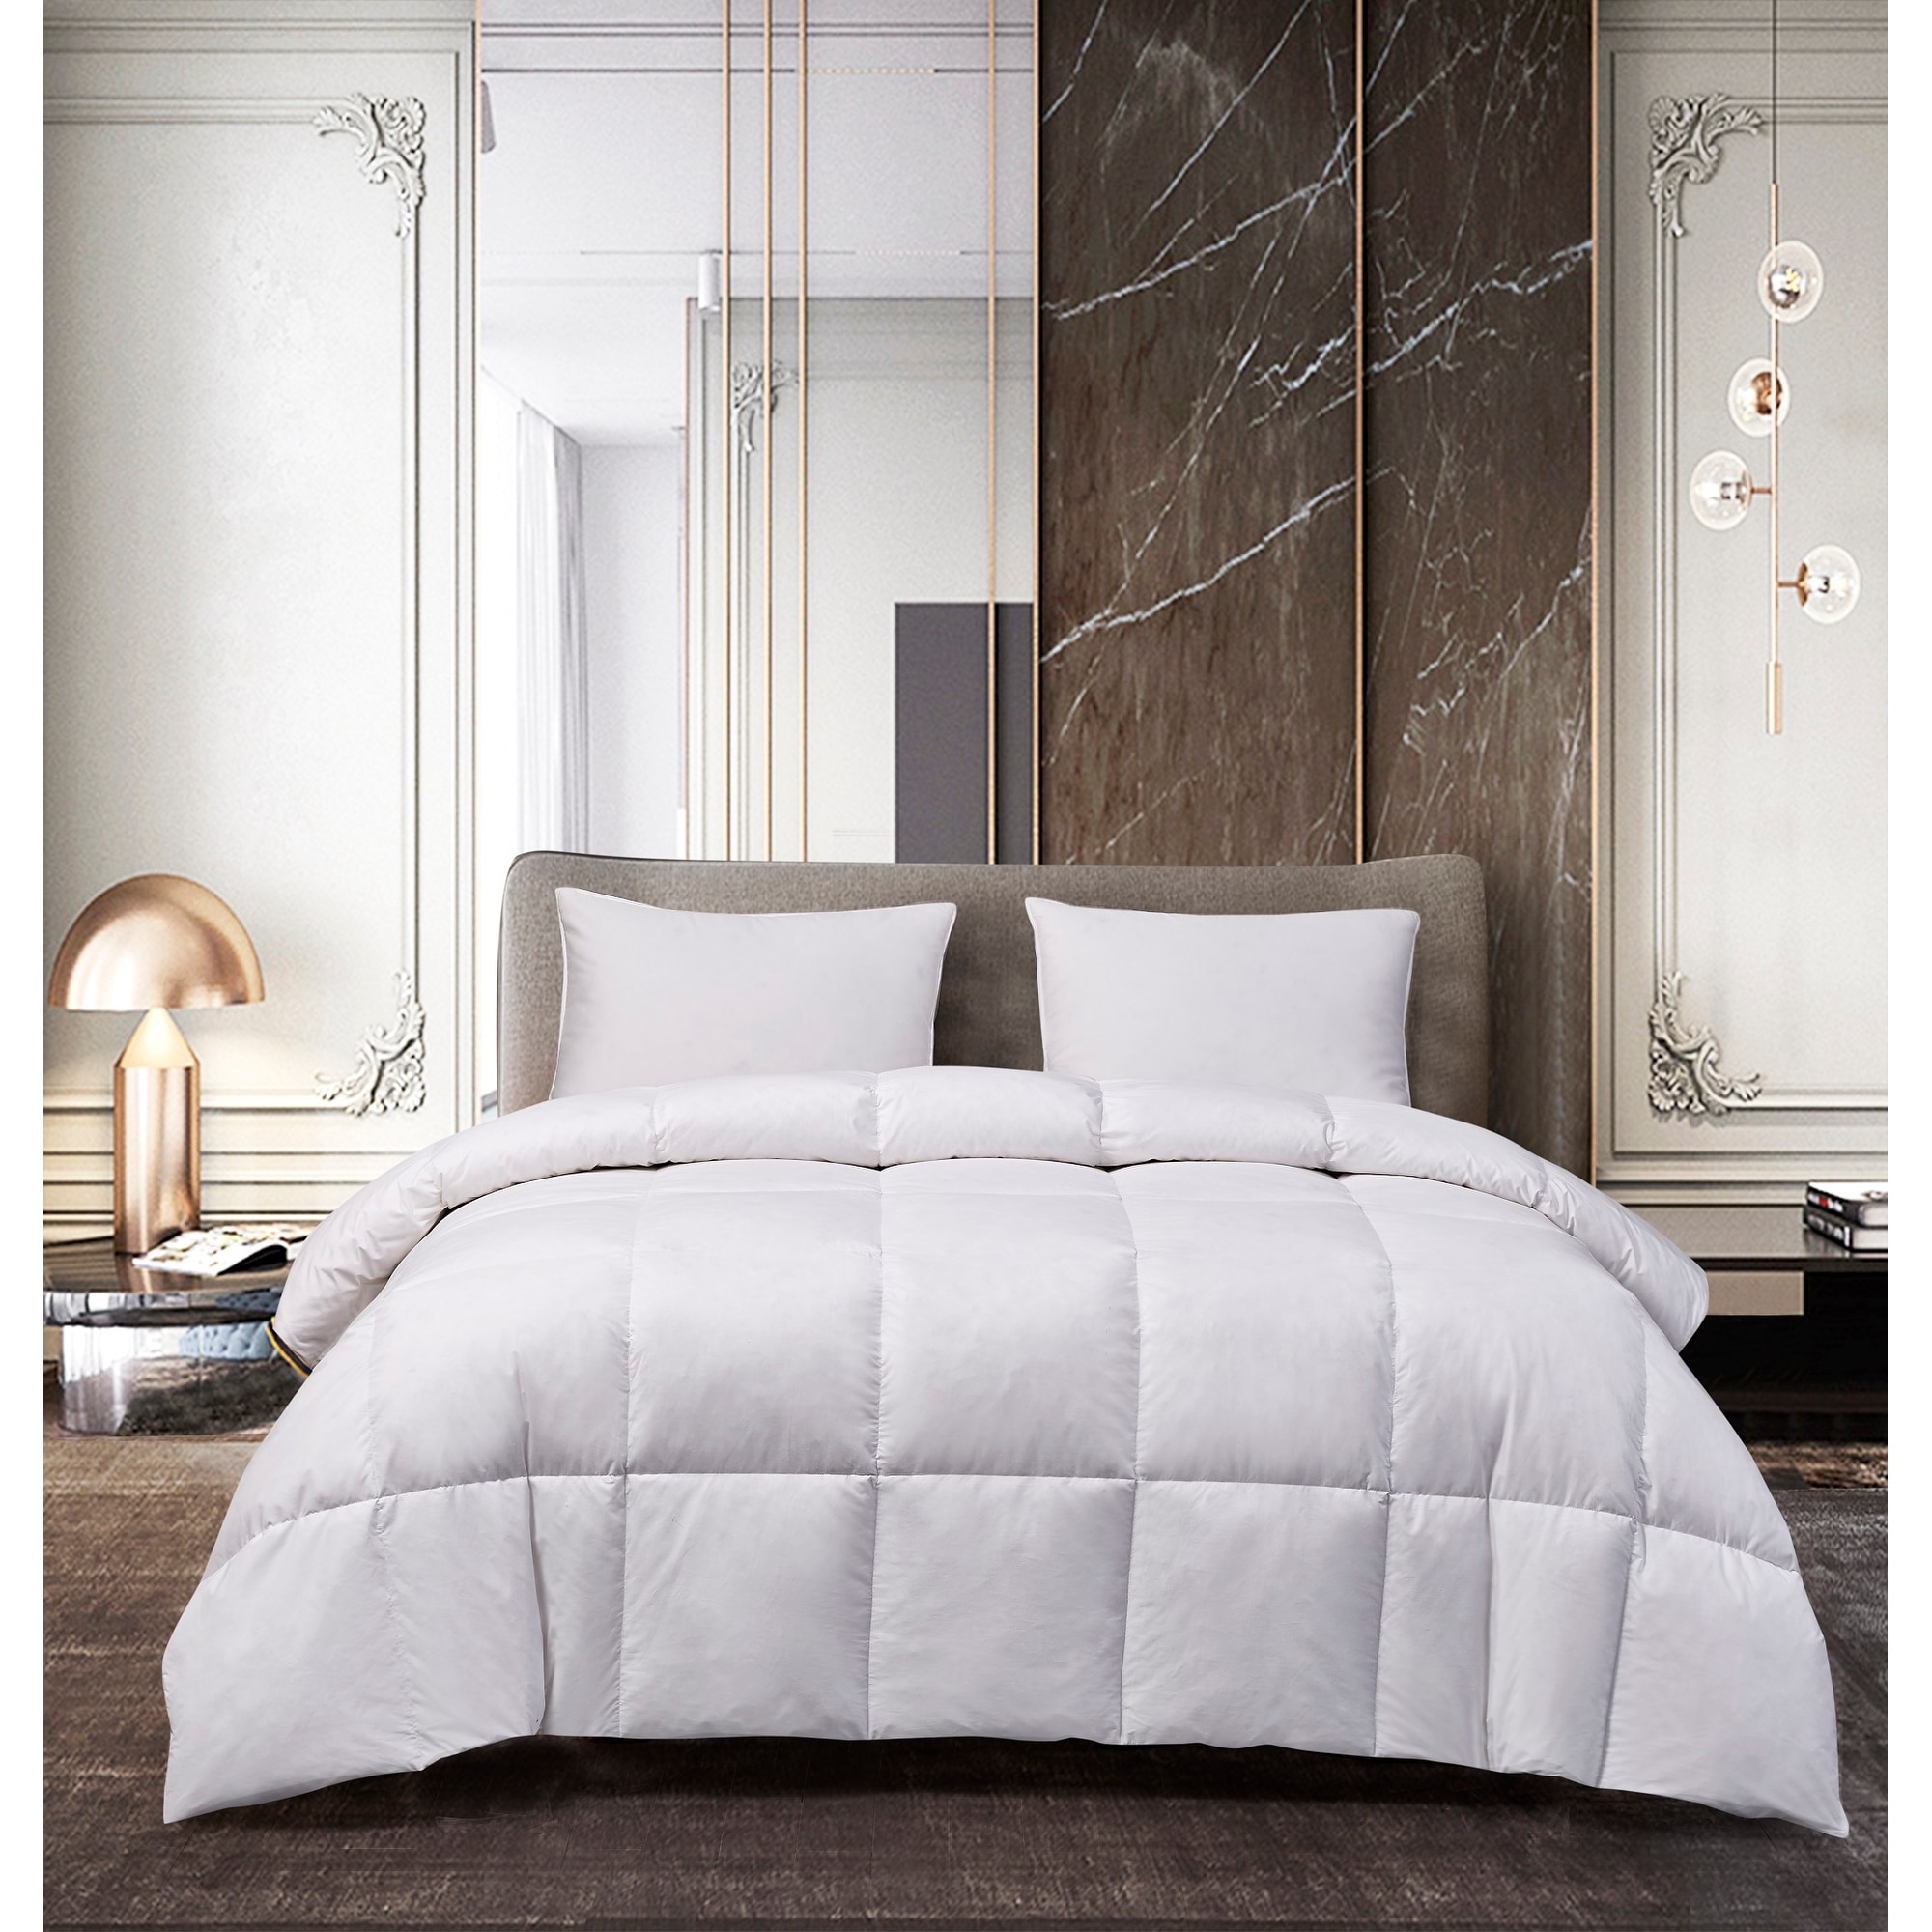 Palais Hotel Ultra Soft Light Warmth White Down Comforter 